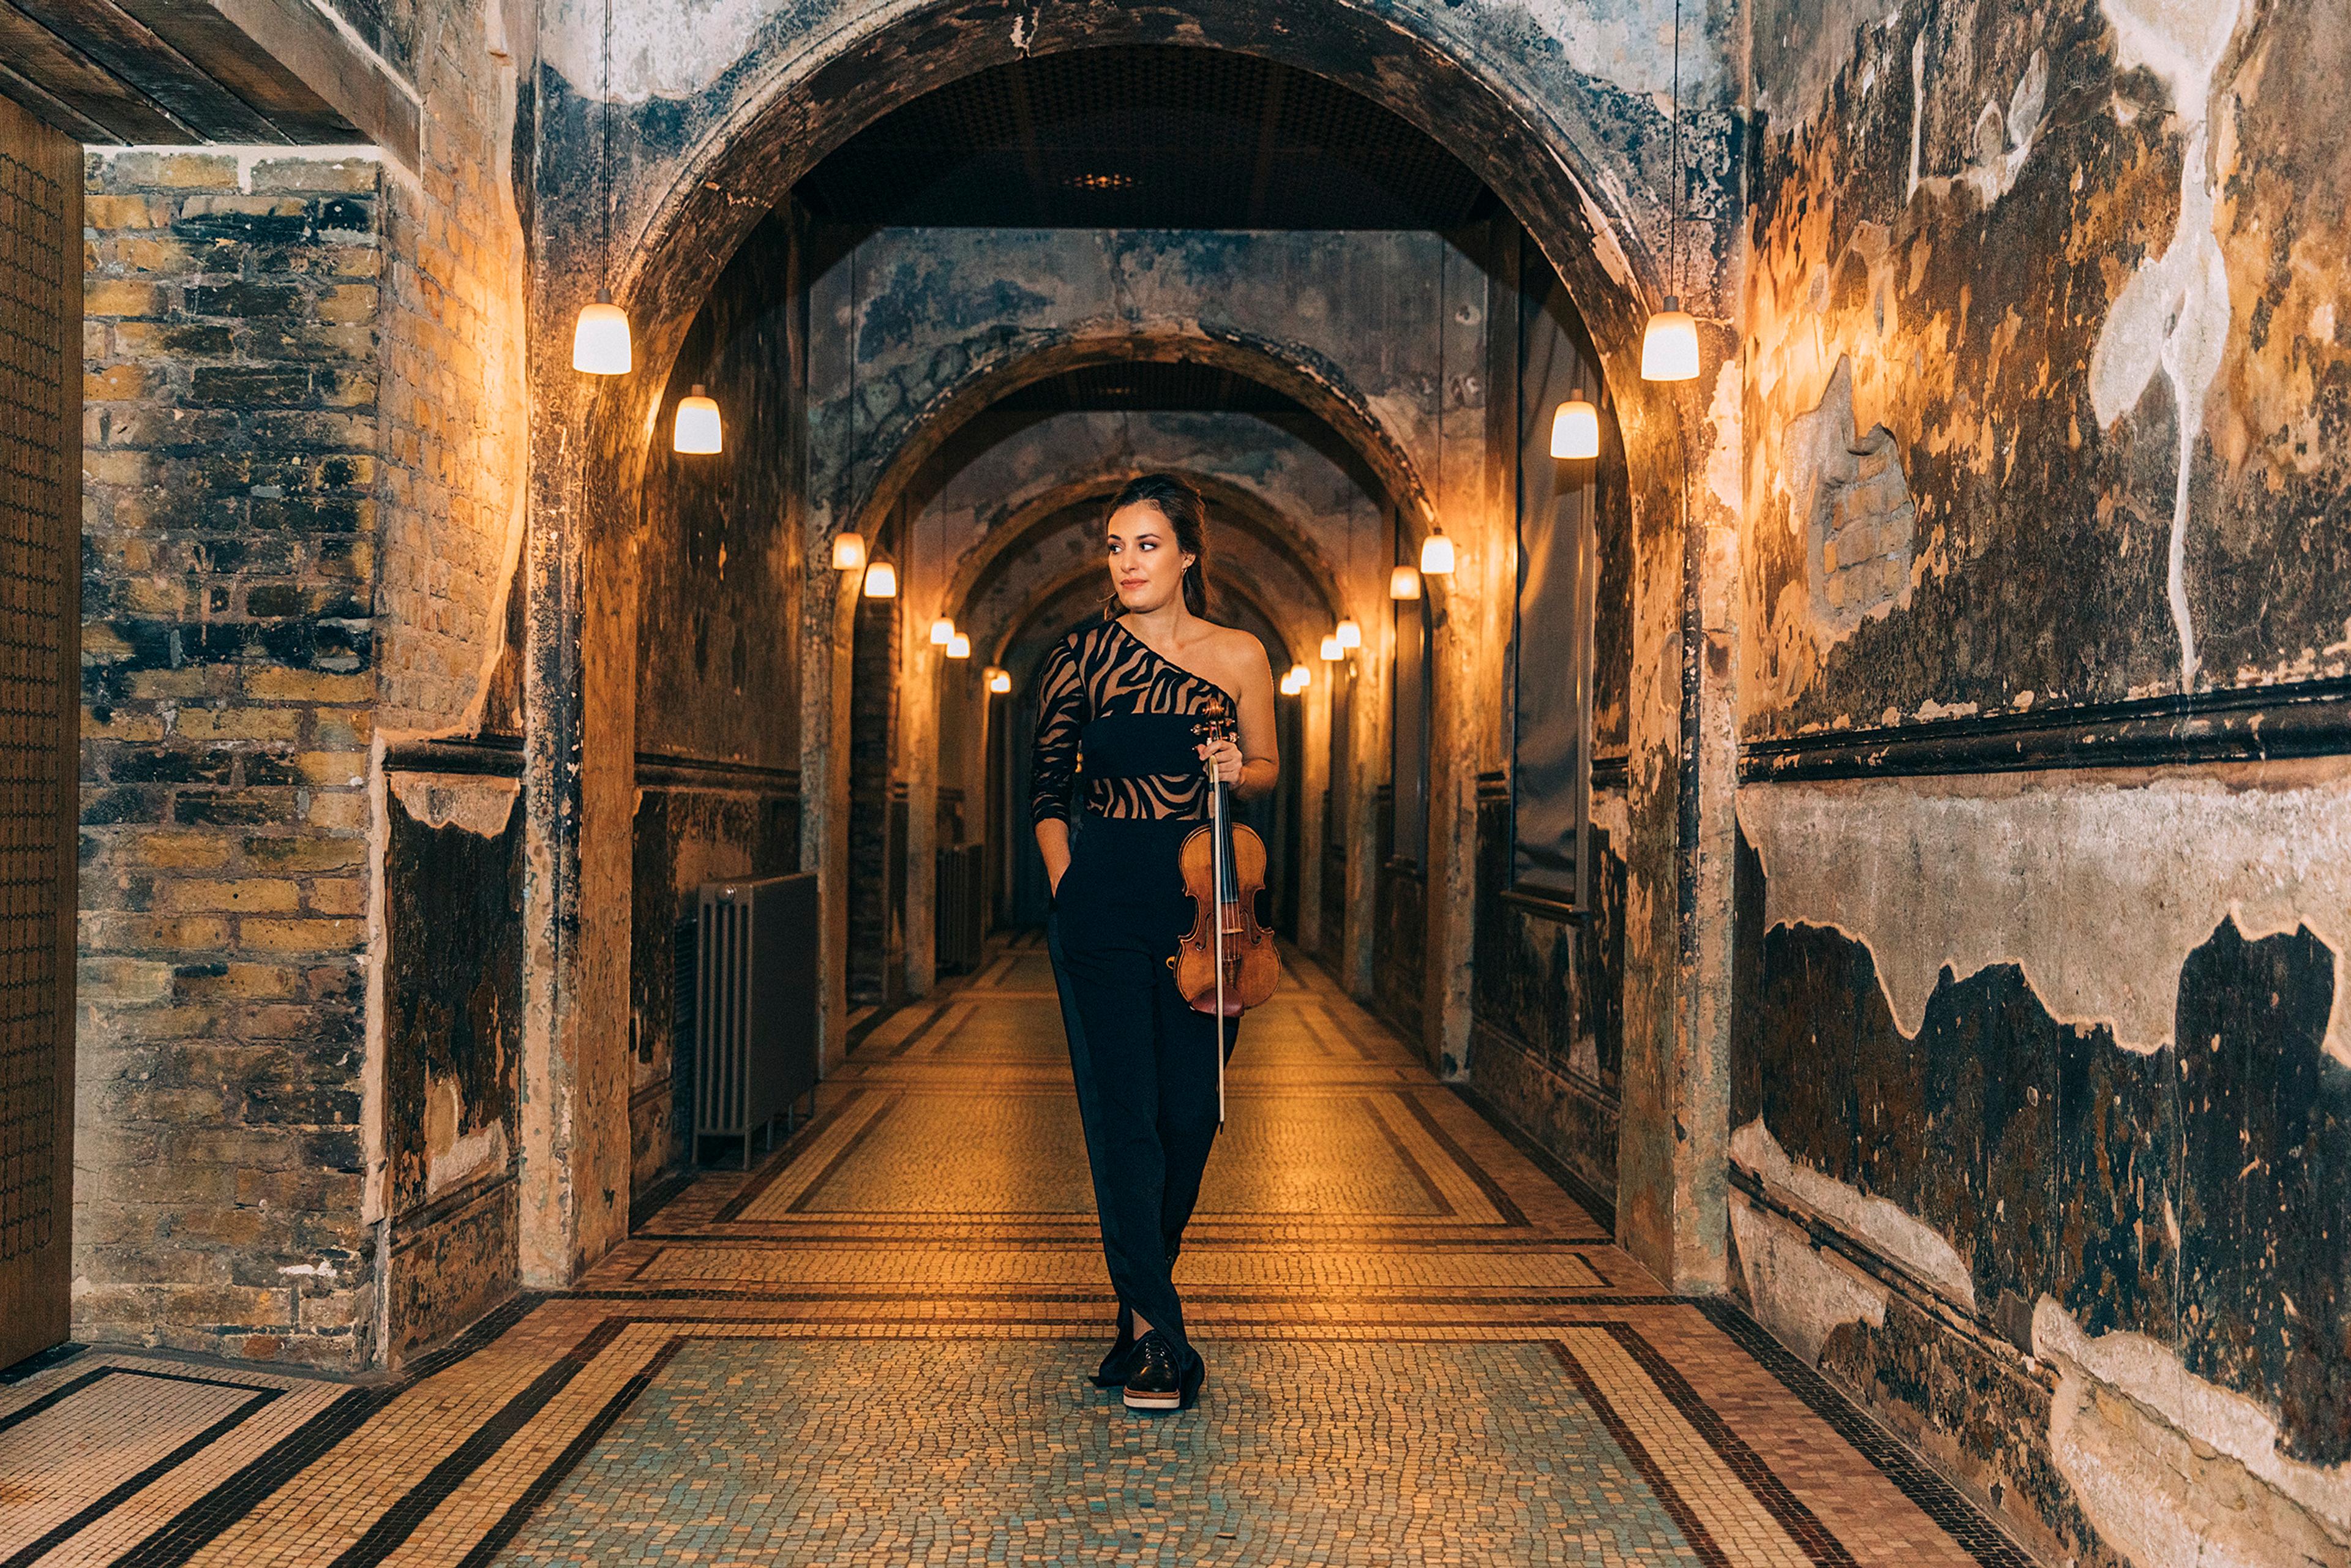 Nicola Benedetti stood in a warmly lit corridor holding her violin in one hand